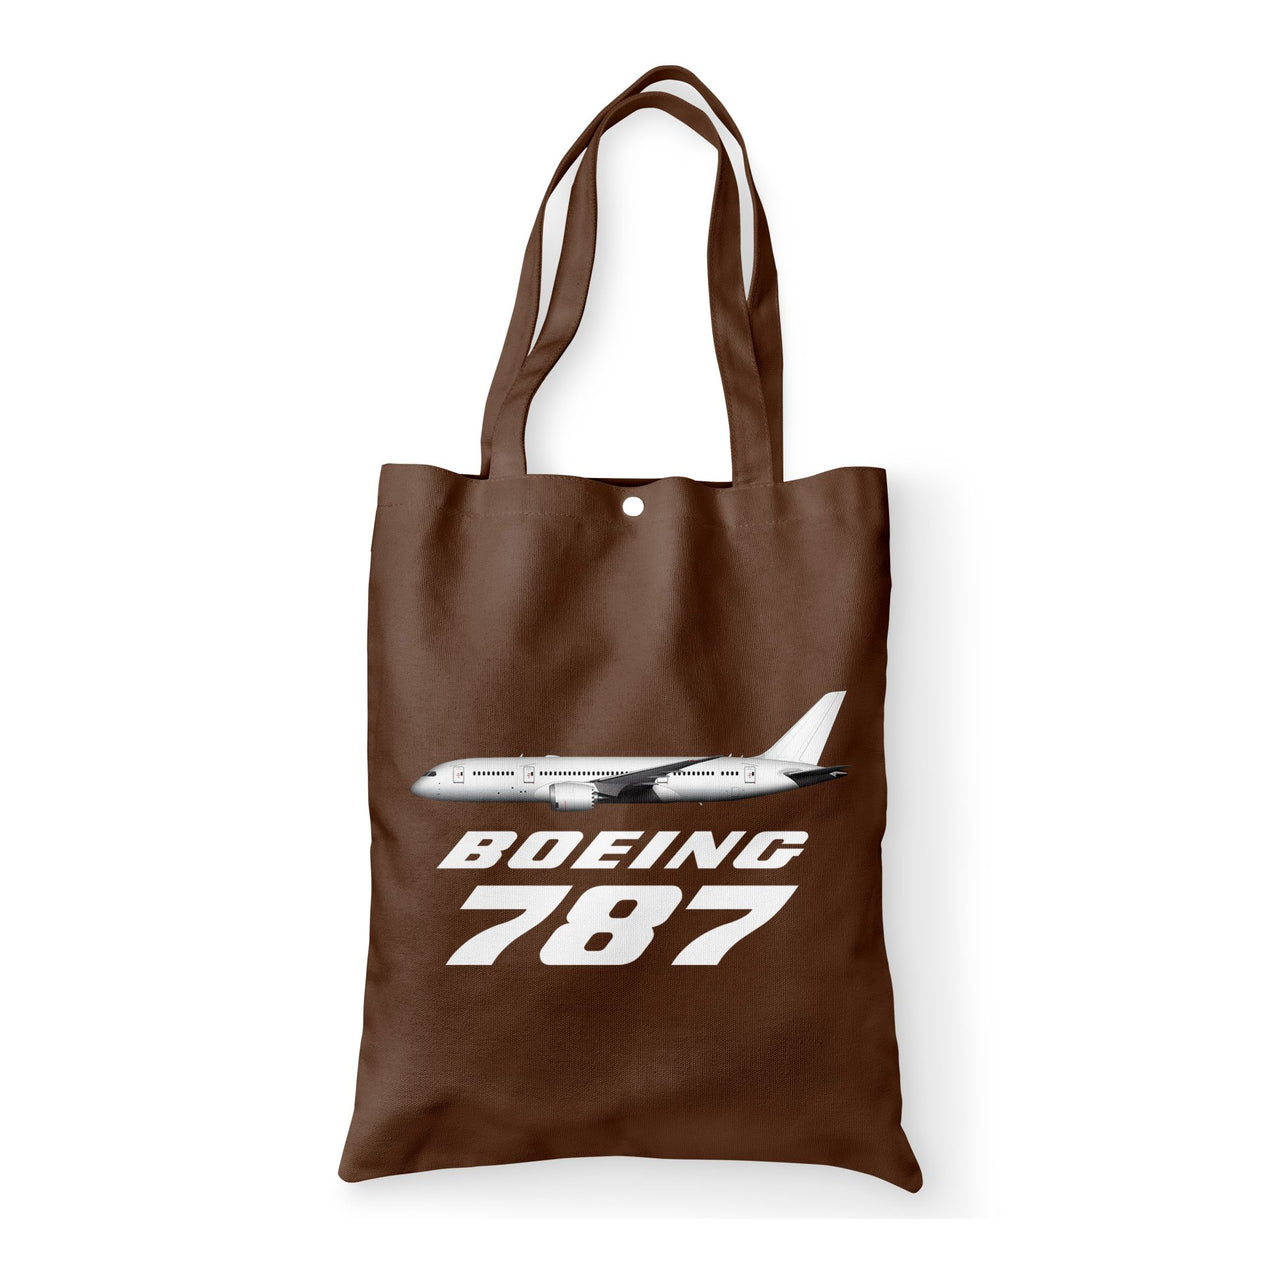 The Boeing 787 Designed Tote Bags